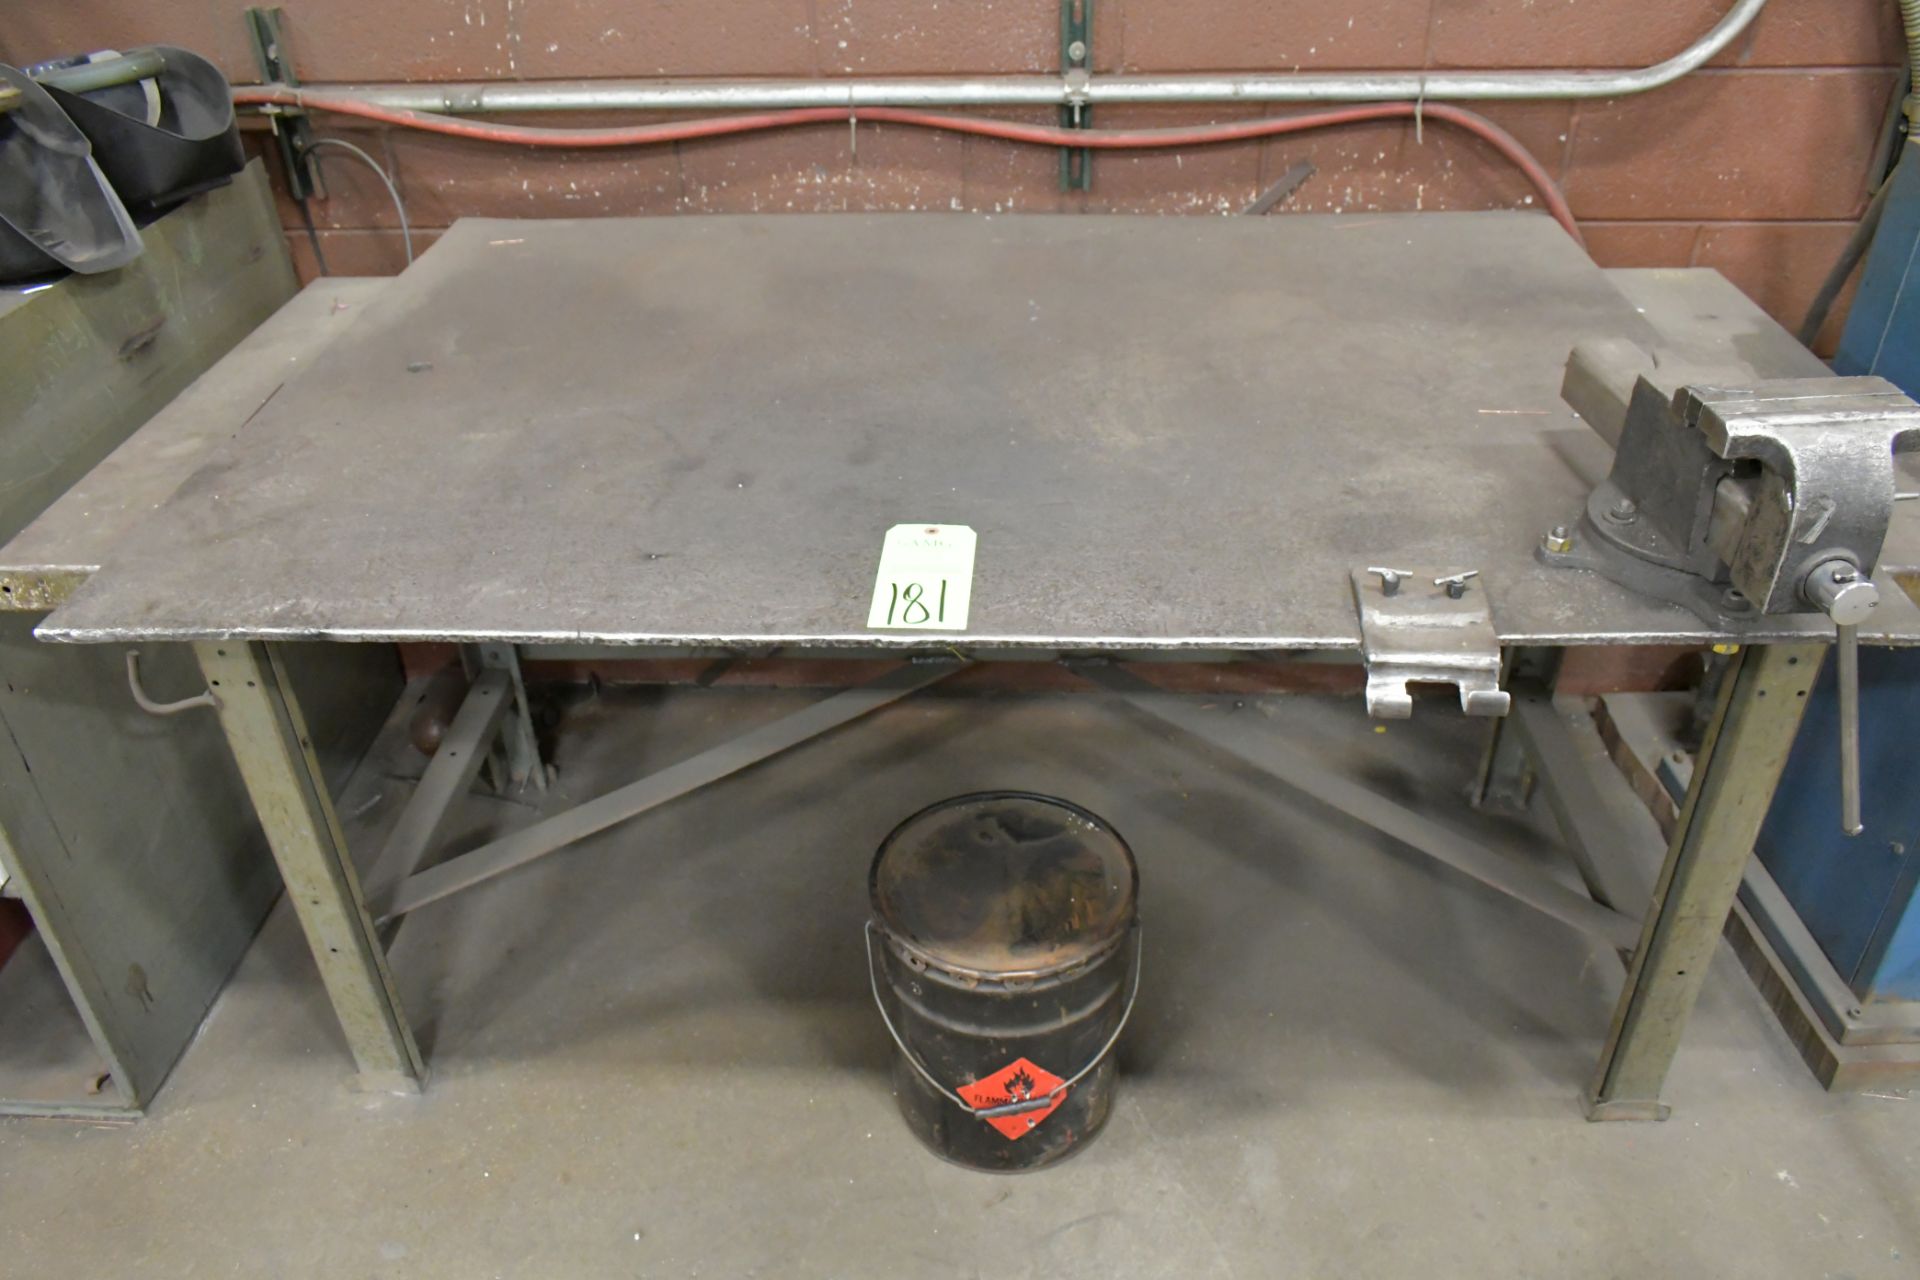 Lot-(1) 42" x 60" x 3/8" Steel Welding Table with (1) 6" Bench Vise